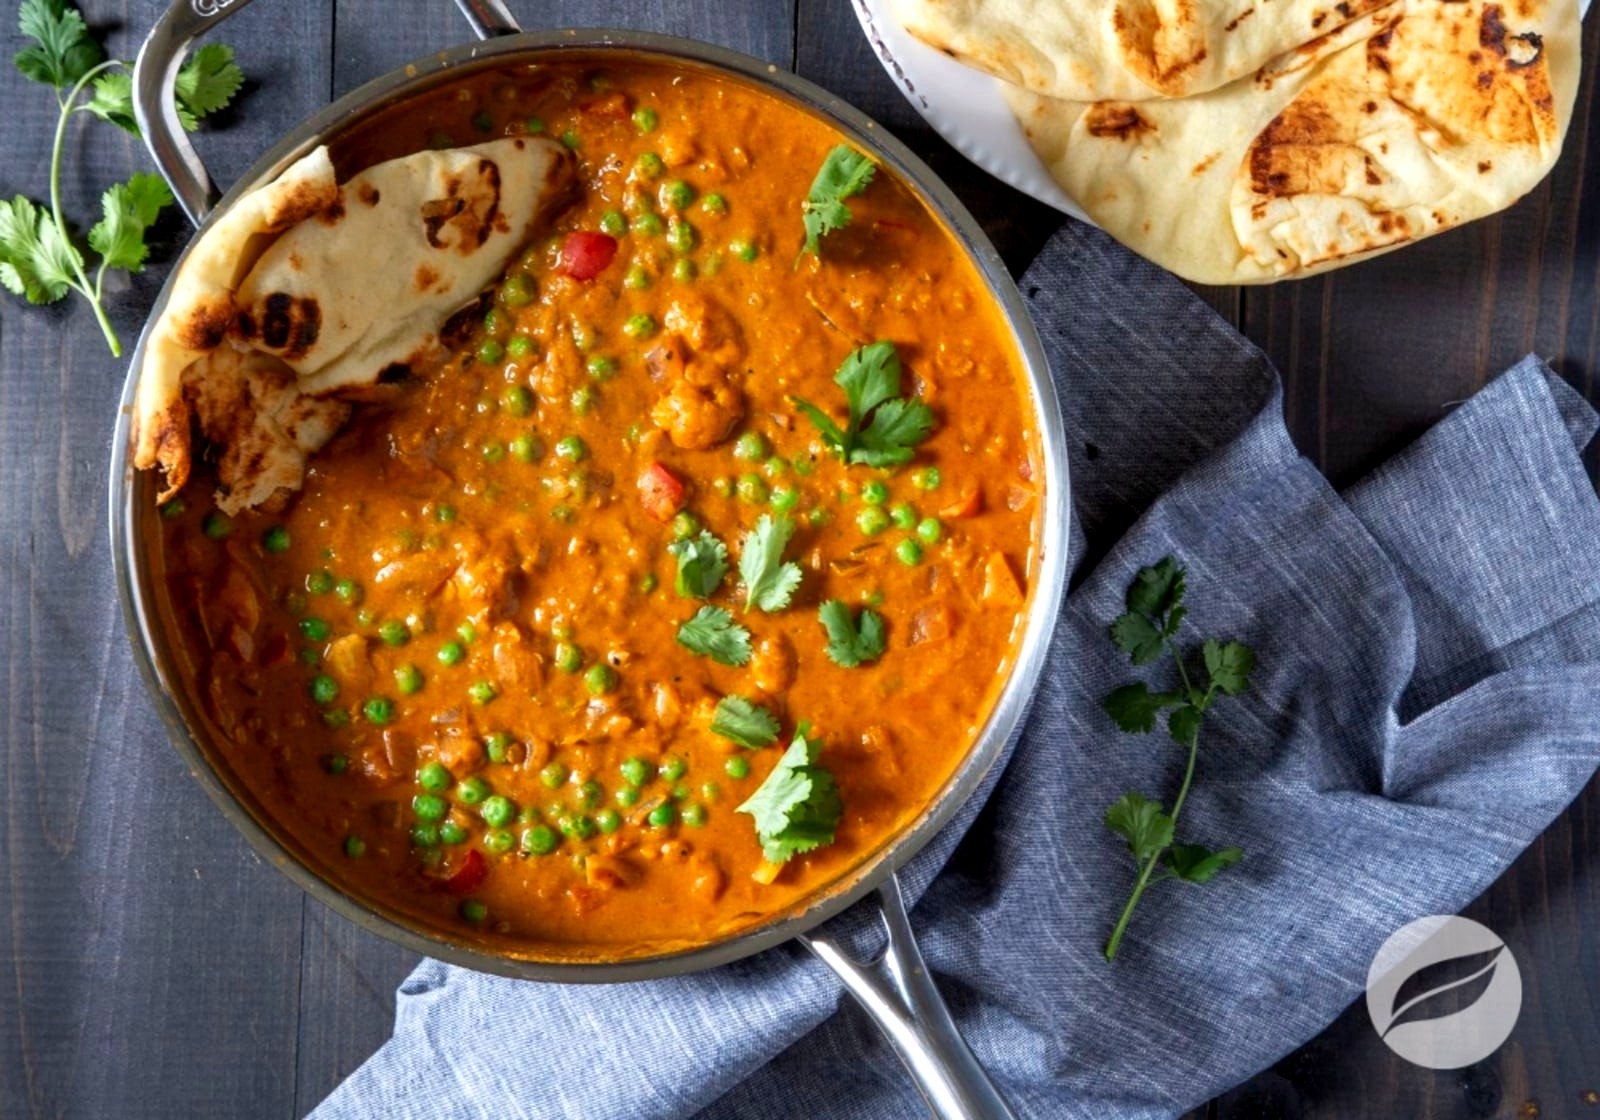 Image of Red Lentil & Vegetable Curry